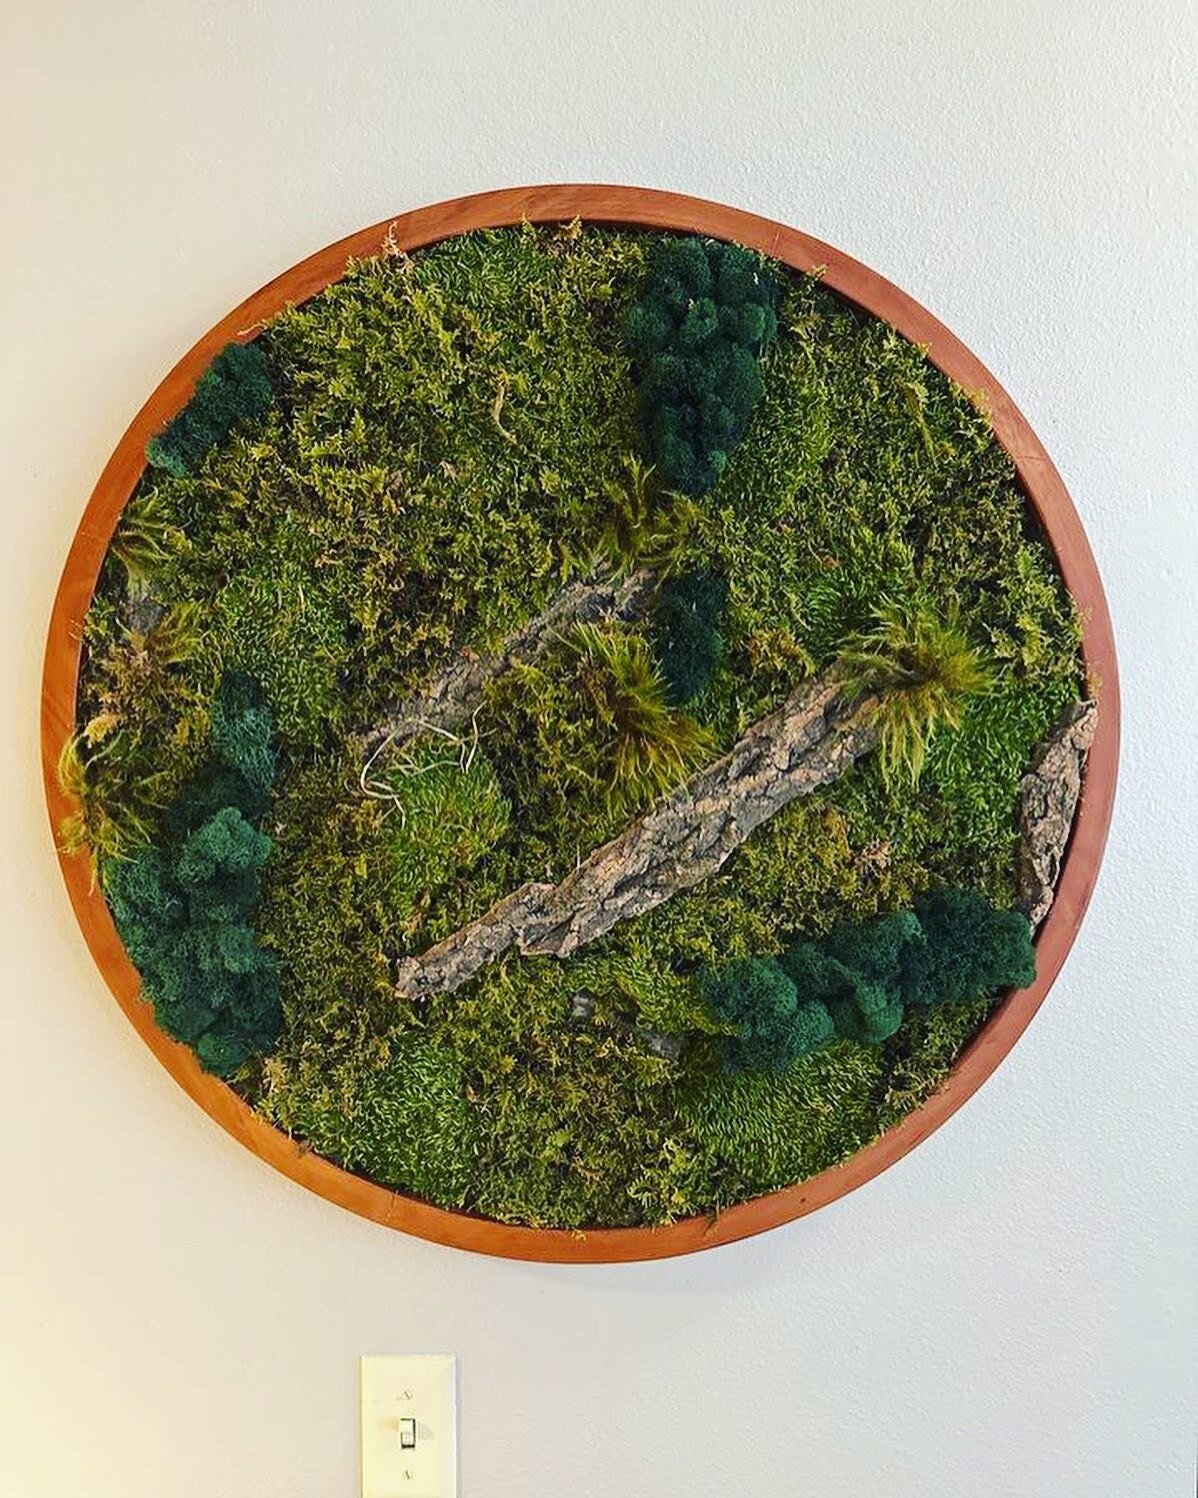 Love seeing our moss walls in action 🙌 
Moss boasts limitless design potential and really brings life to a space. DM us for your own today! @growgiesenplantshop 

Thank you to one of our clients for sending these to us!
#wichitalifeict #ictgirlgang 